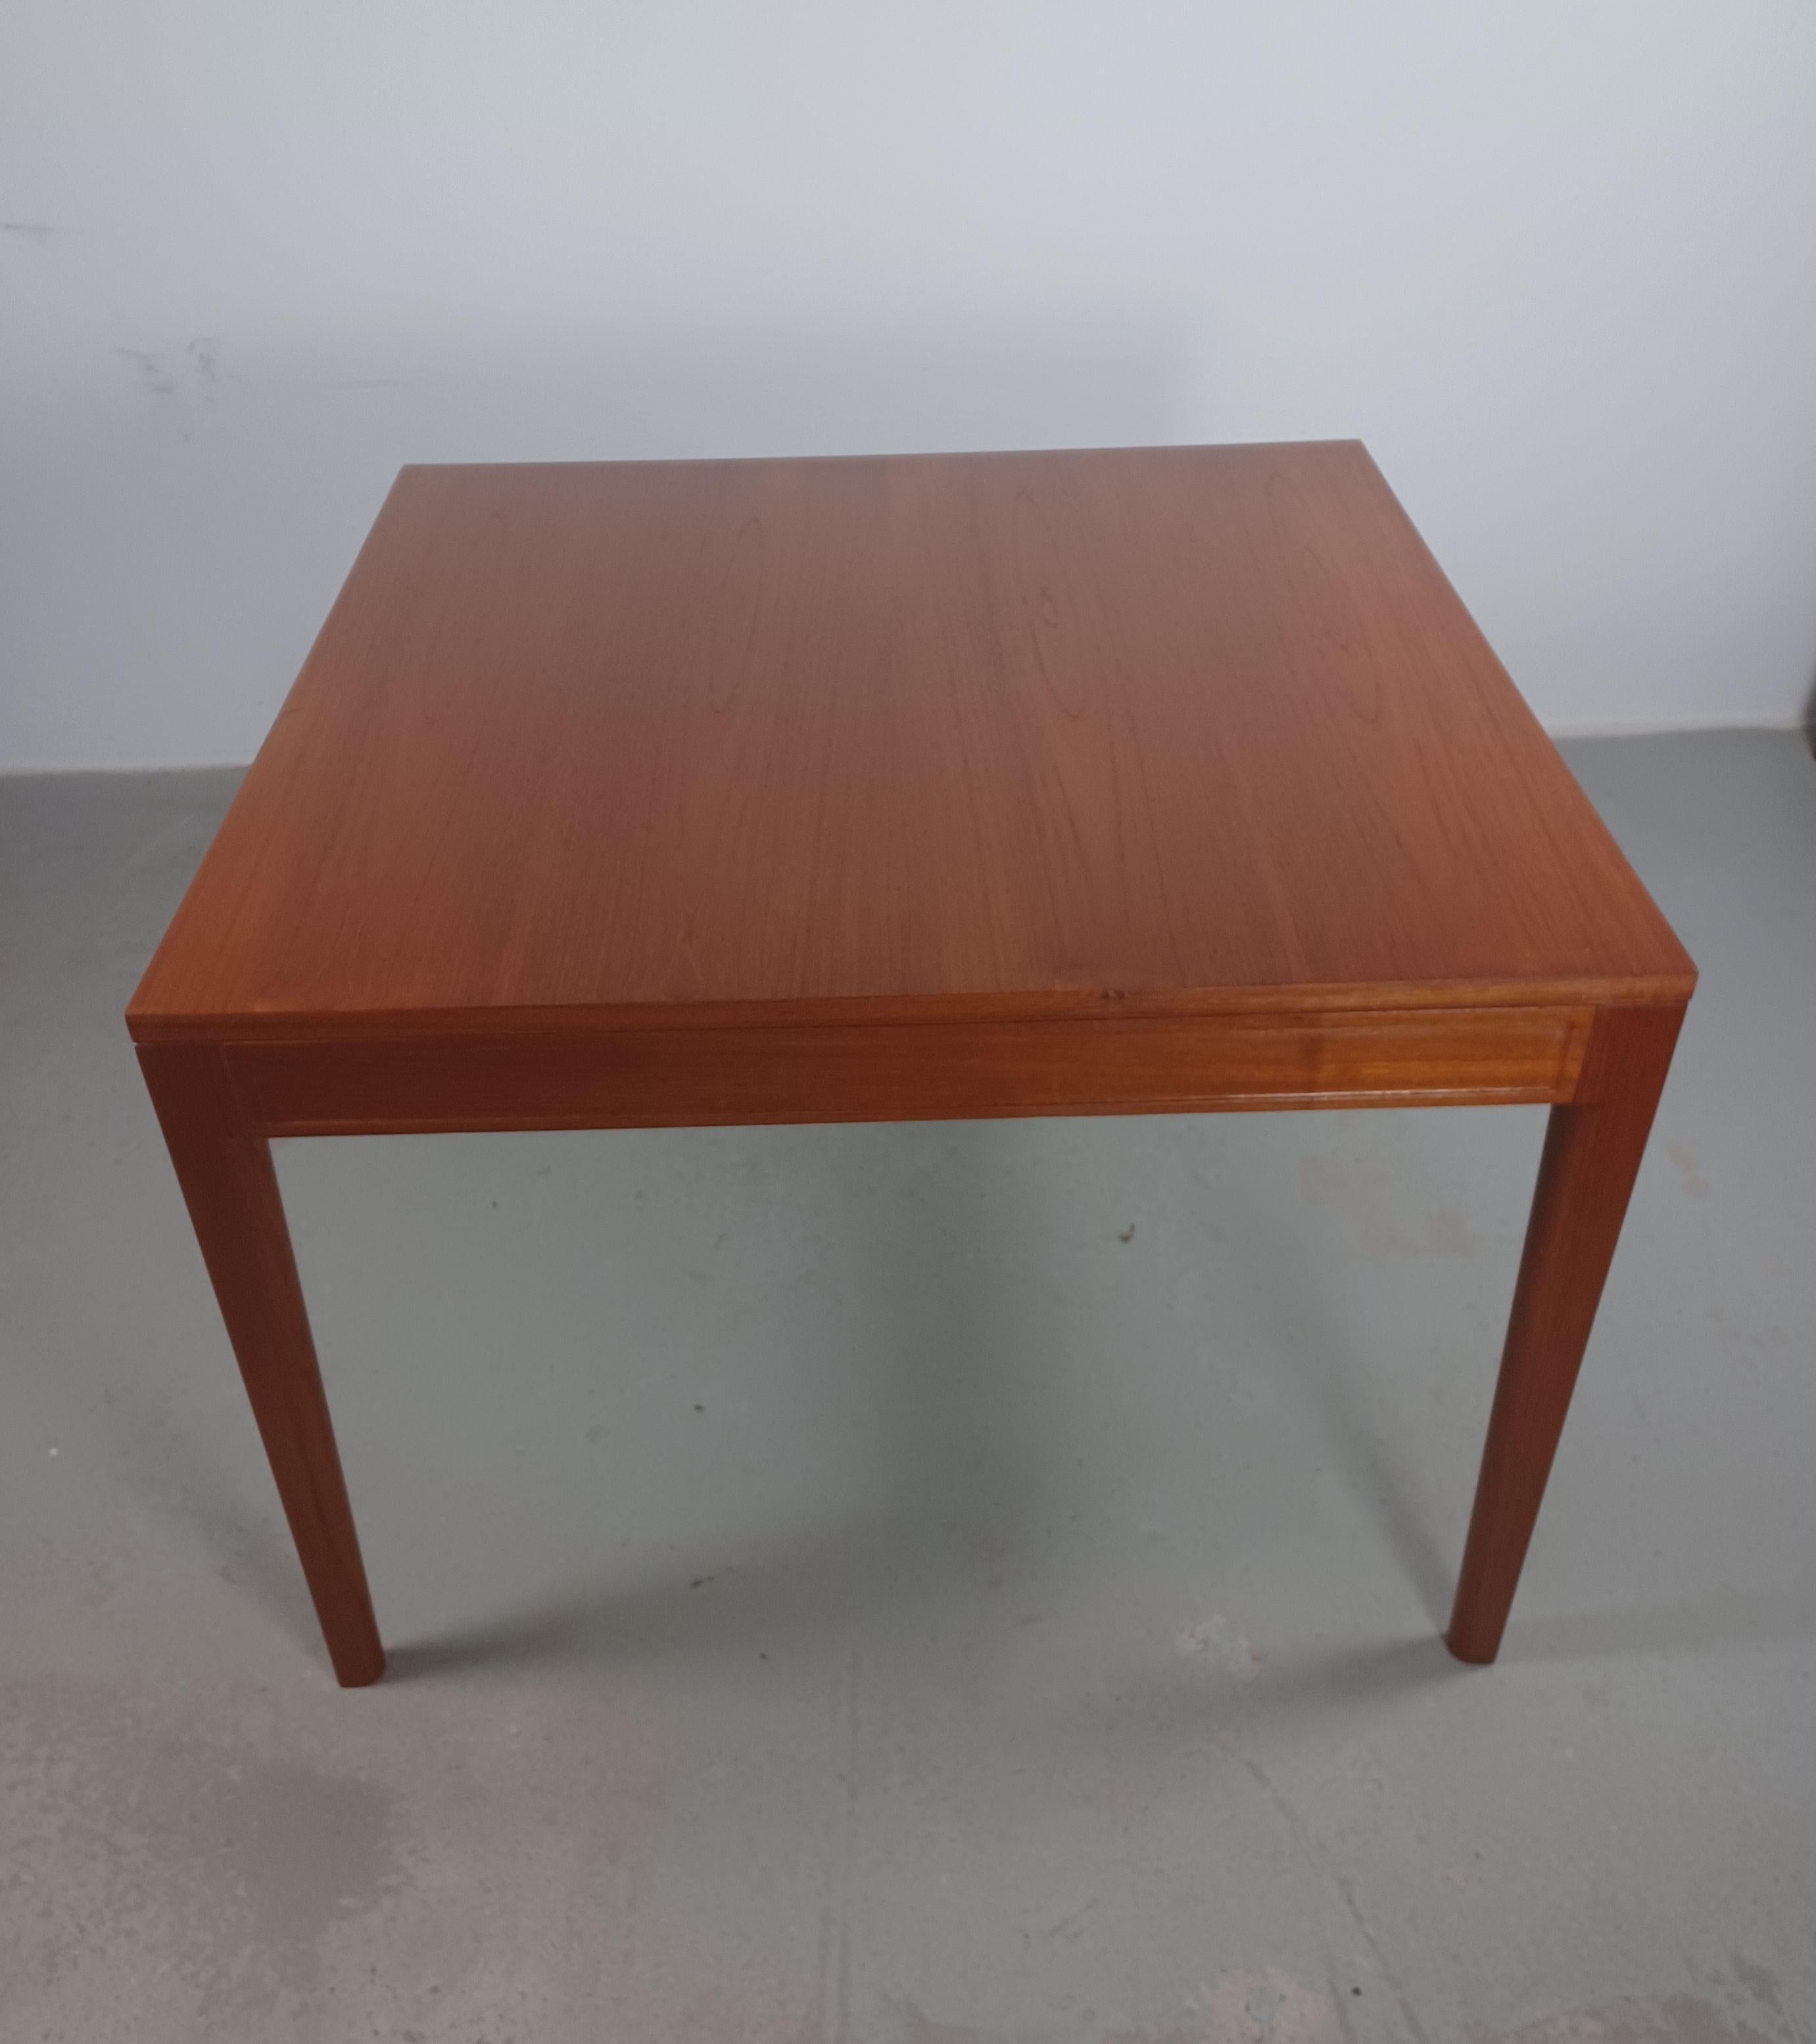 1960s Finn Juhl Fully Restored Diplomat Teak Side Table by France and Daverkosen.

Finn Juhl designed a series of furniture´from 1961 and forward called the Diplomat series with chairs, desks, tables, cabinets and other furniture that was made in